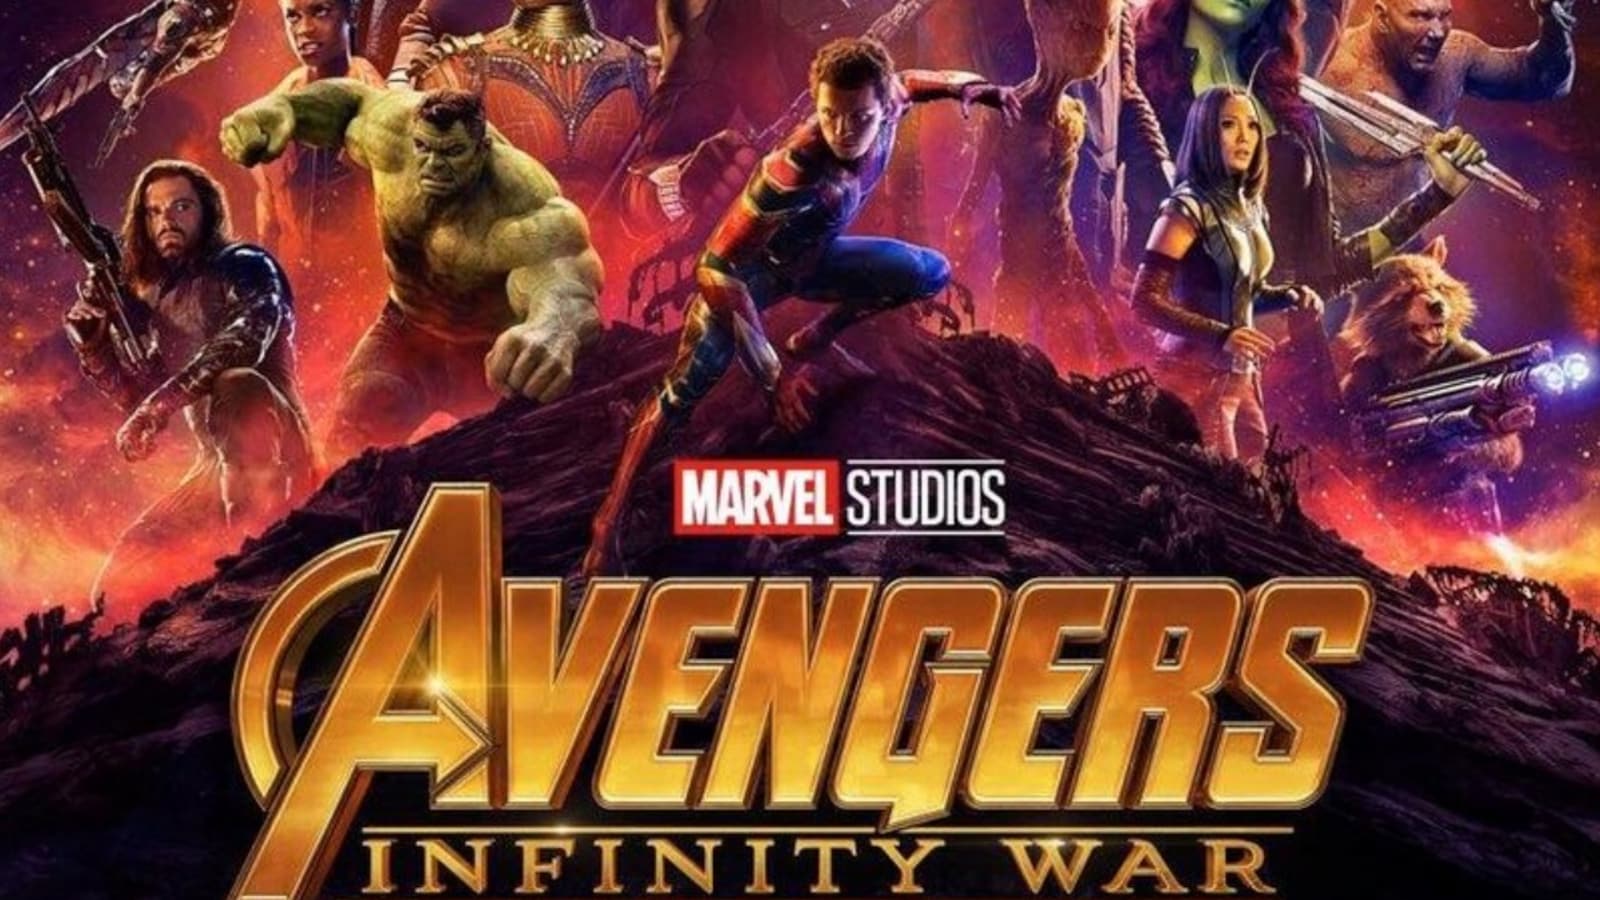 Box office 'Marvel' — Avengers: Infinity War nets Rs 30-35 crore on opening  day